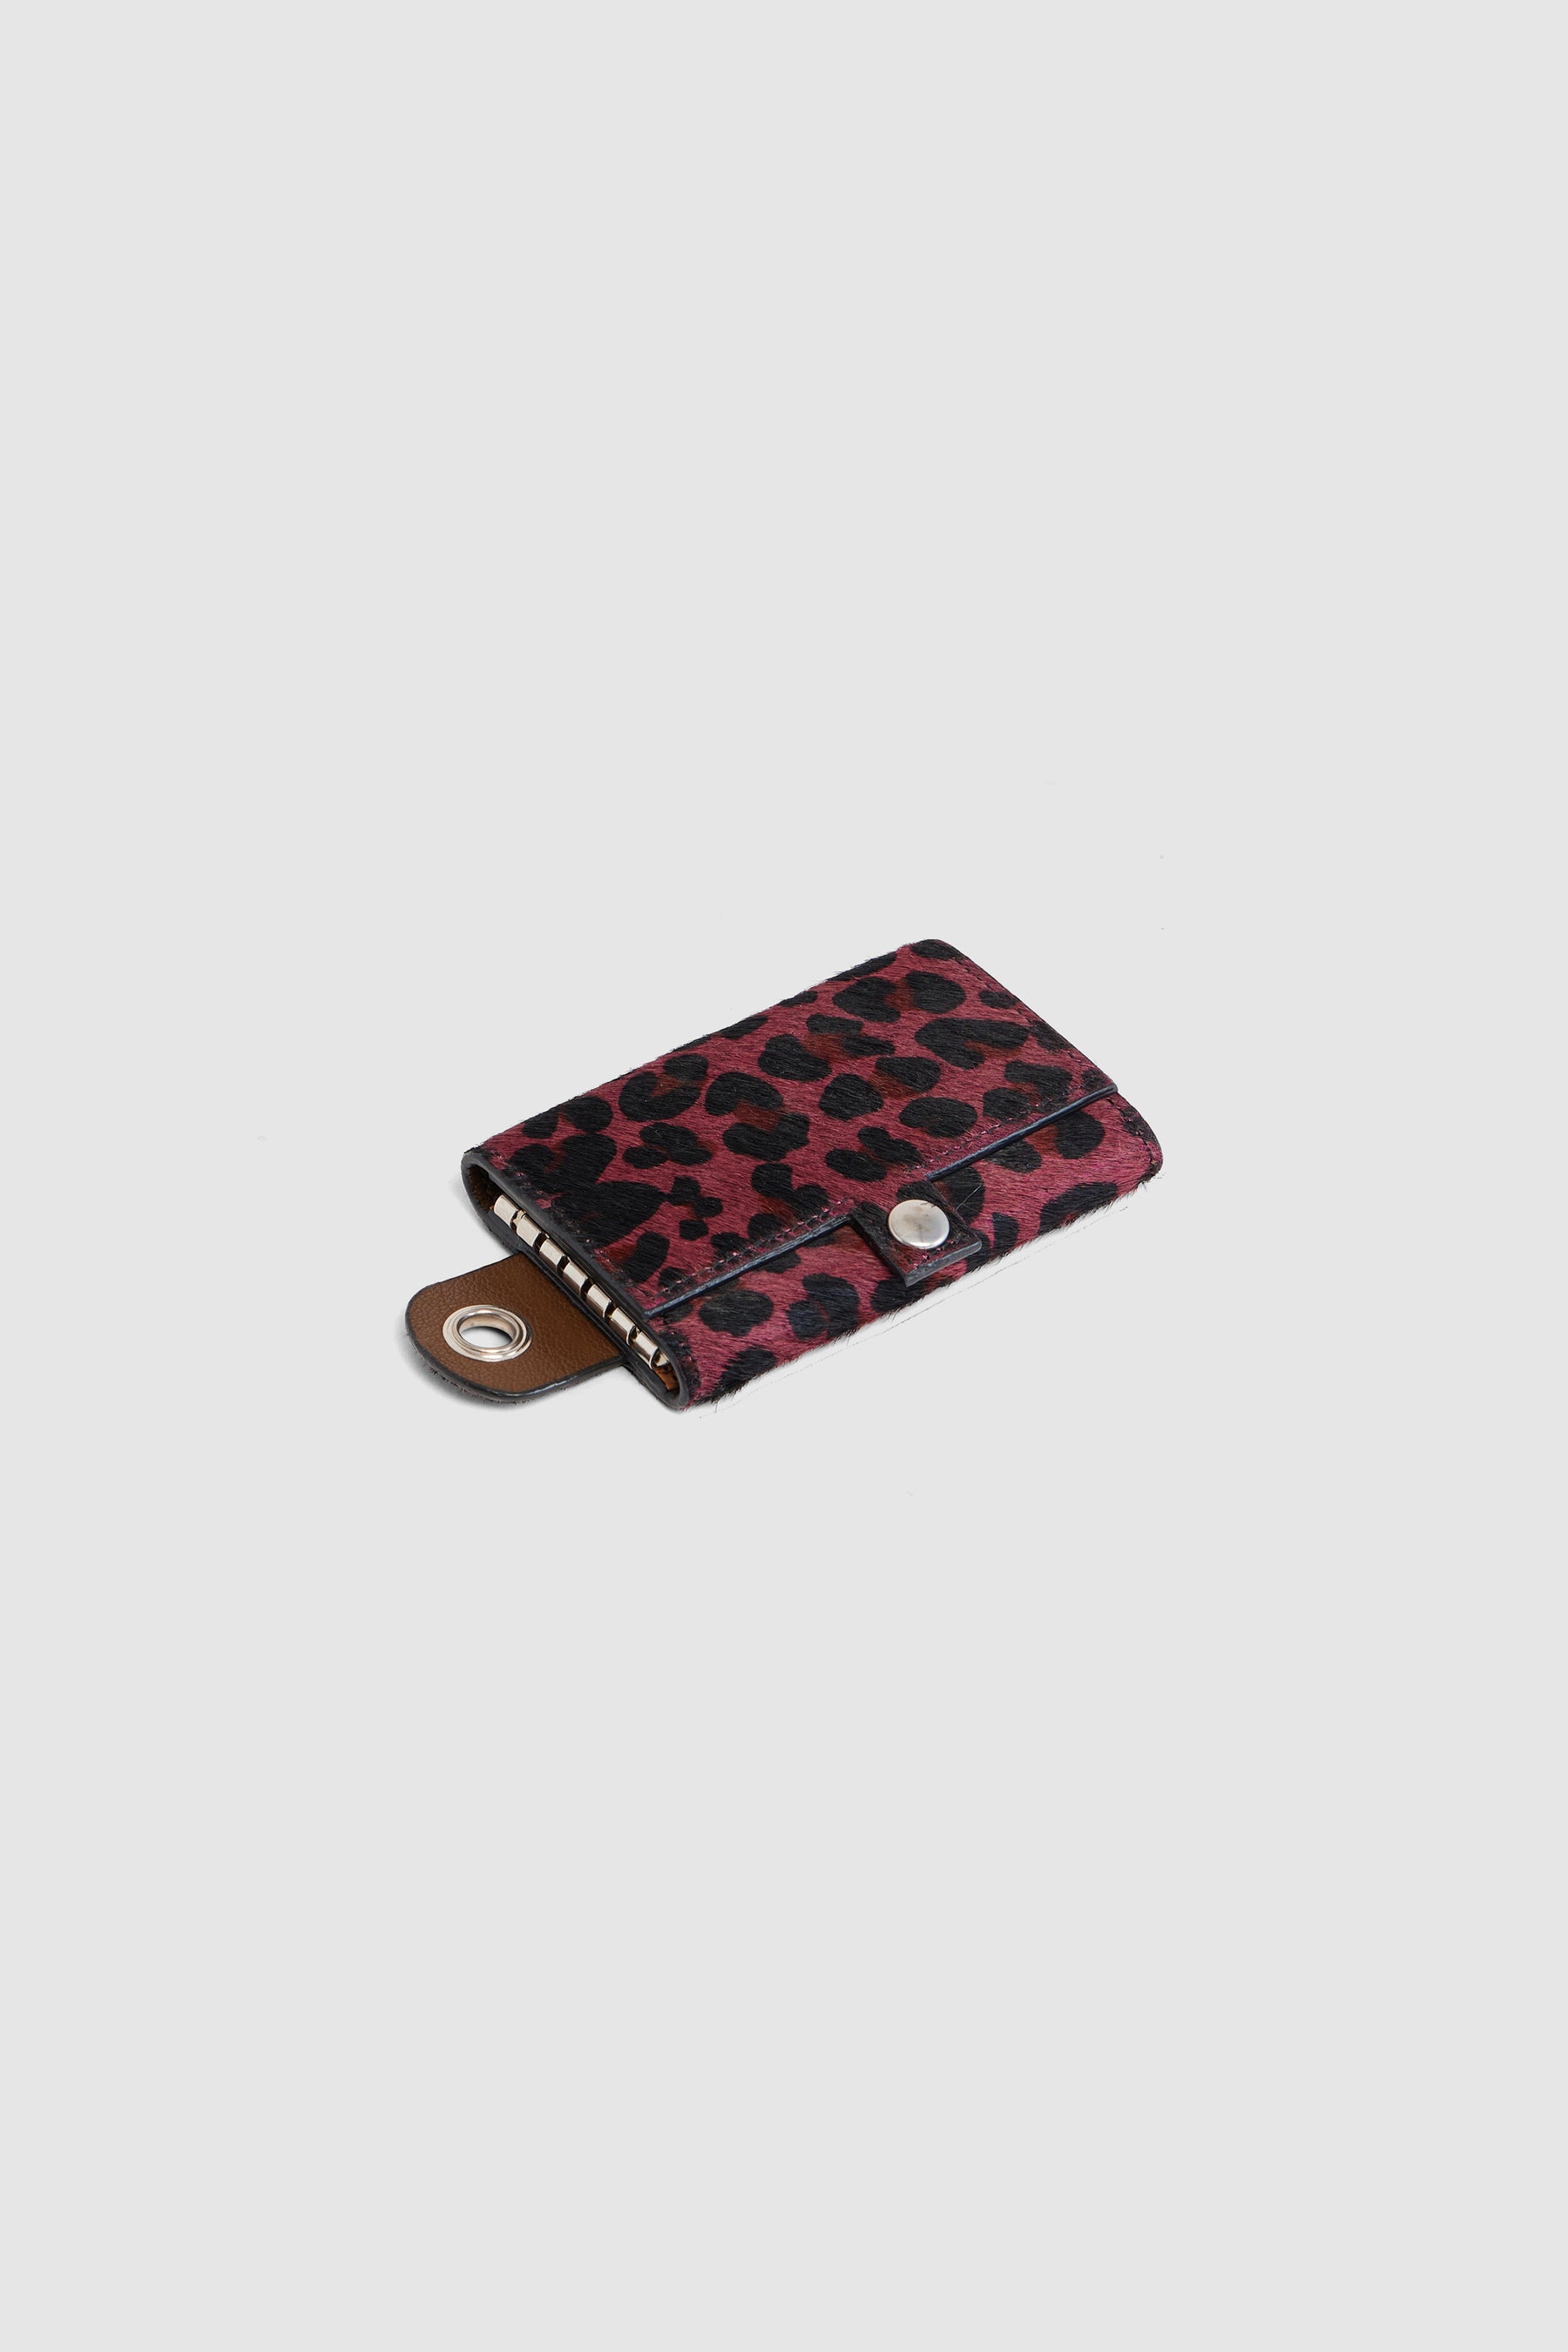 The Minis - 6 key holder in burgundy Leopard printed leather